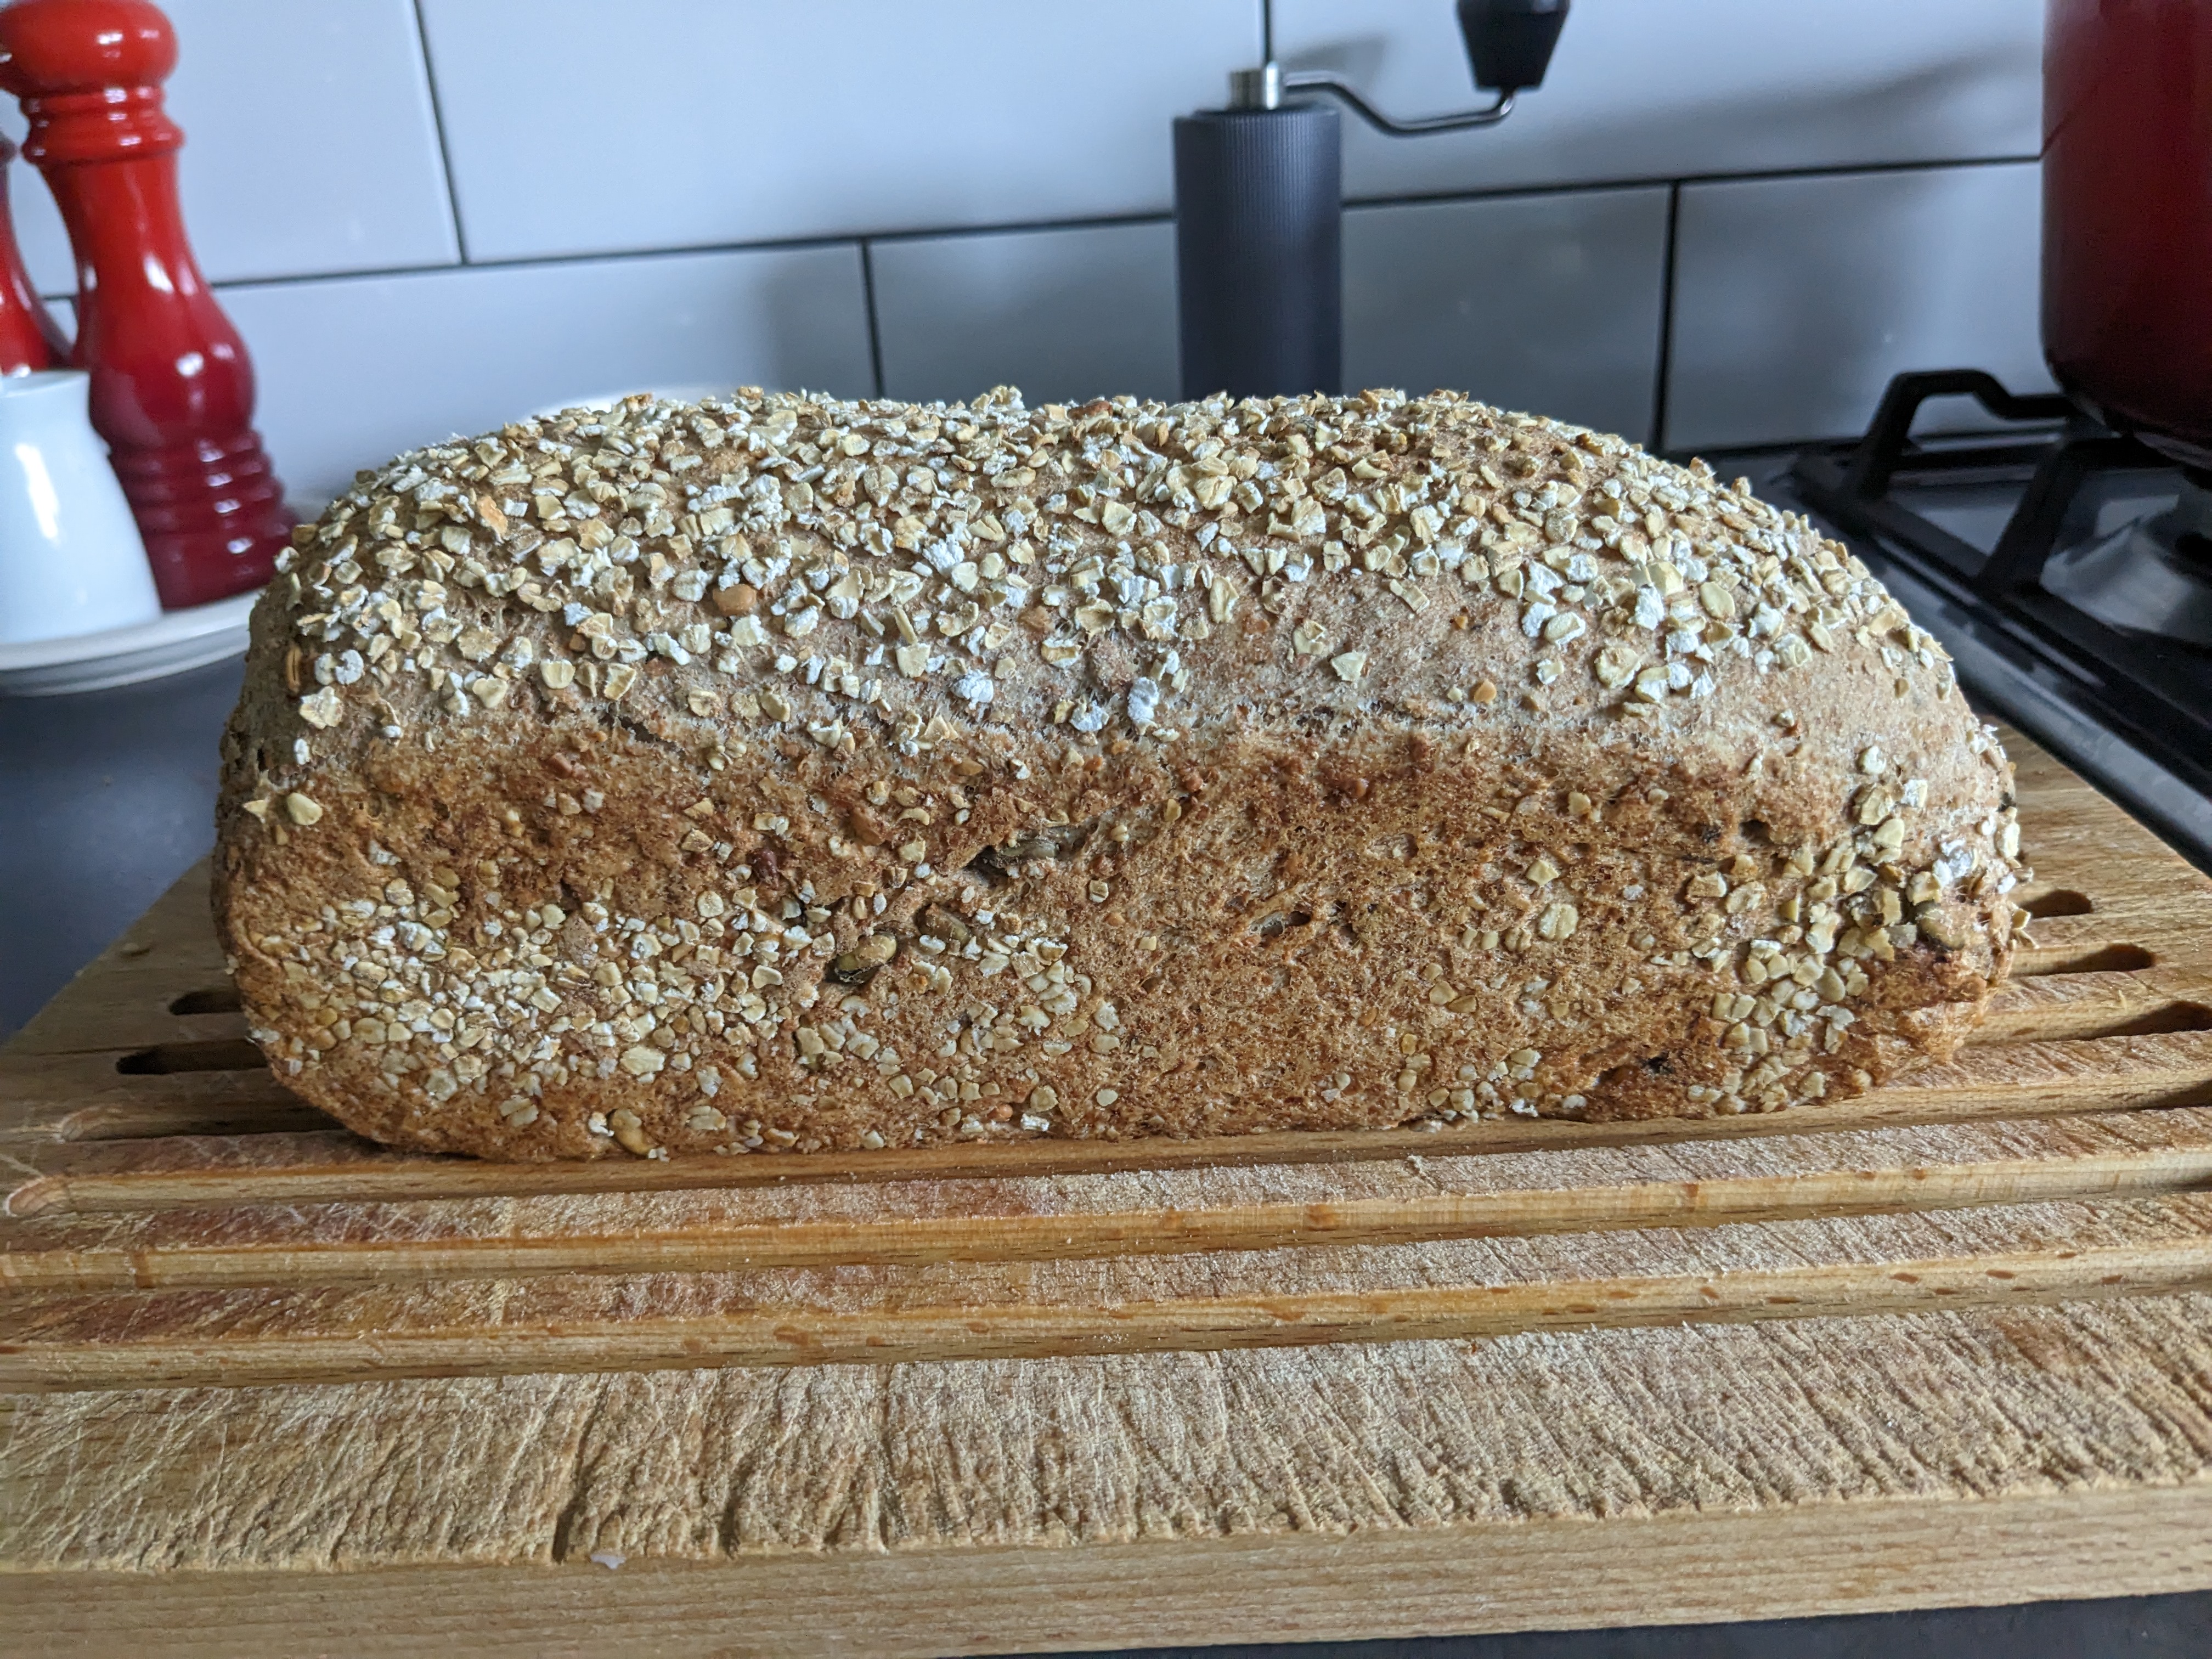 An image of a bread called “Back into baking: a Hartog volkoren with seeds”